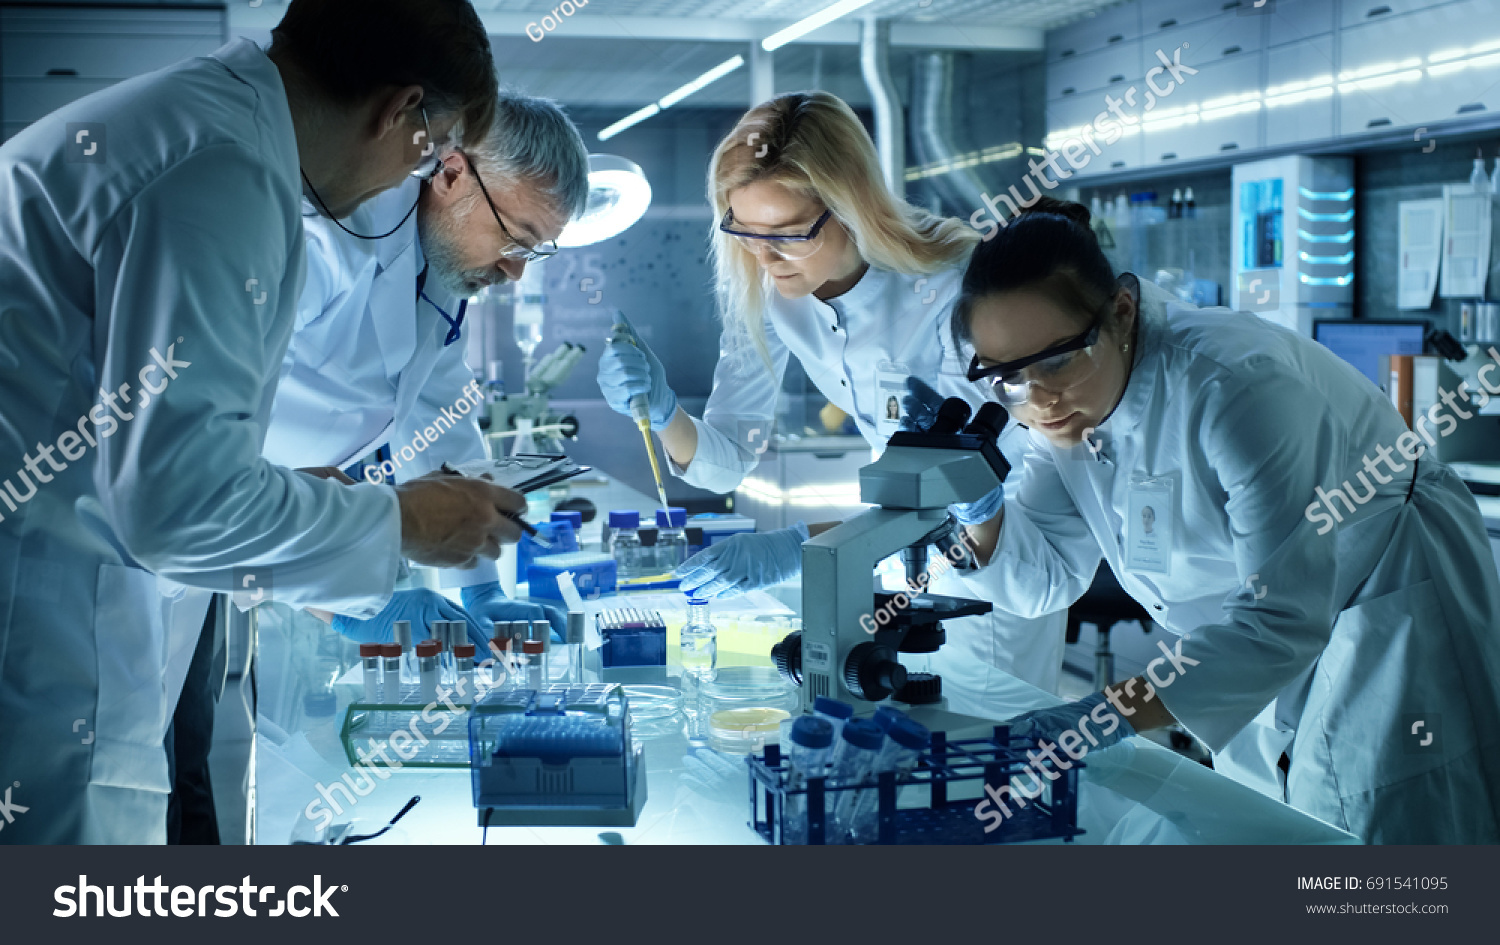 Team of Medical Research Scientists Collectively Working on a New Generation Experimental Drug Treatment. Laboratory Looks Busy, Bright and Modern. #691541095